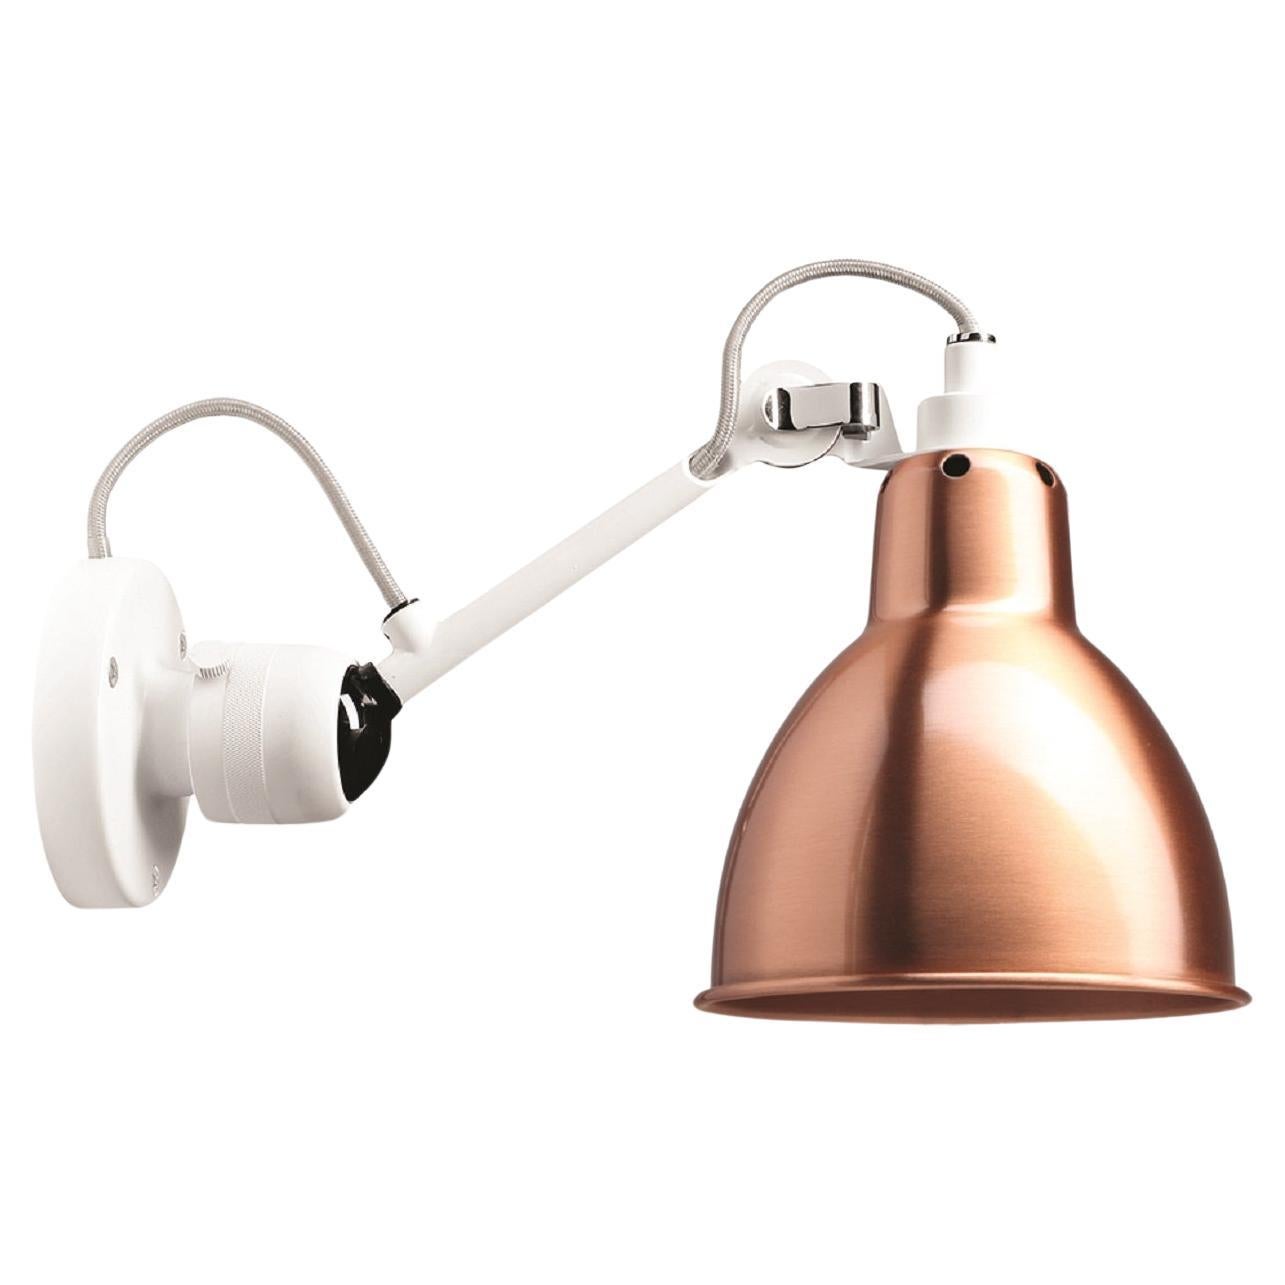 DCW Editions La Lampe Gras N°304 Wall Lamp in White Arm and Copper Shade For Sale